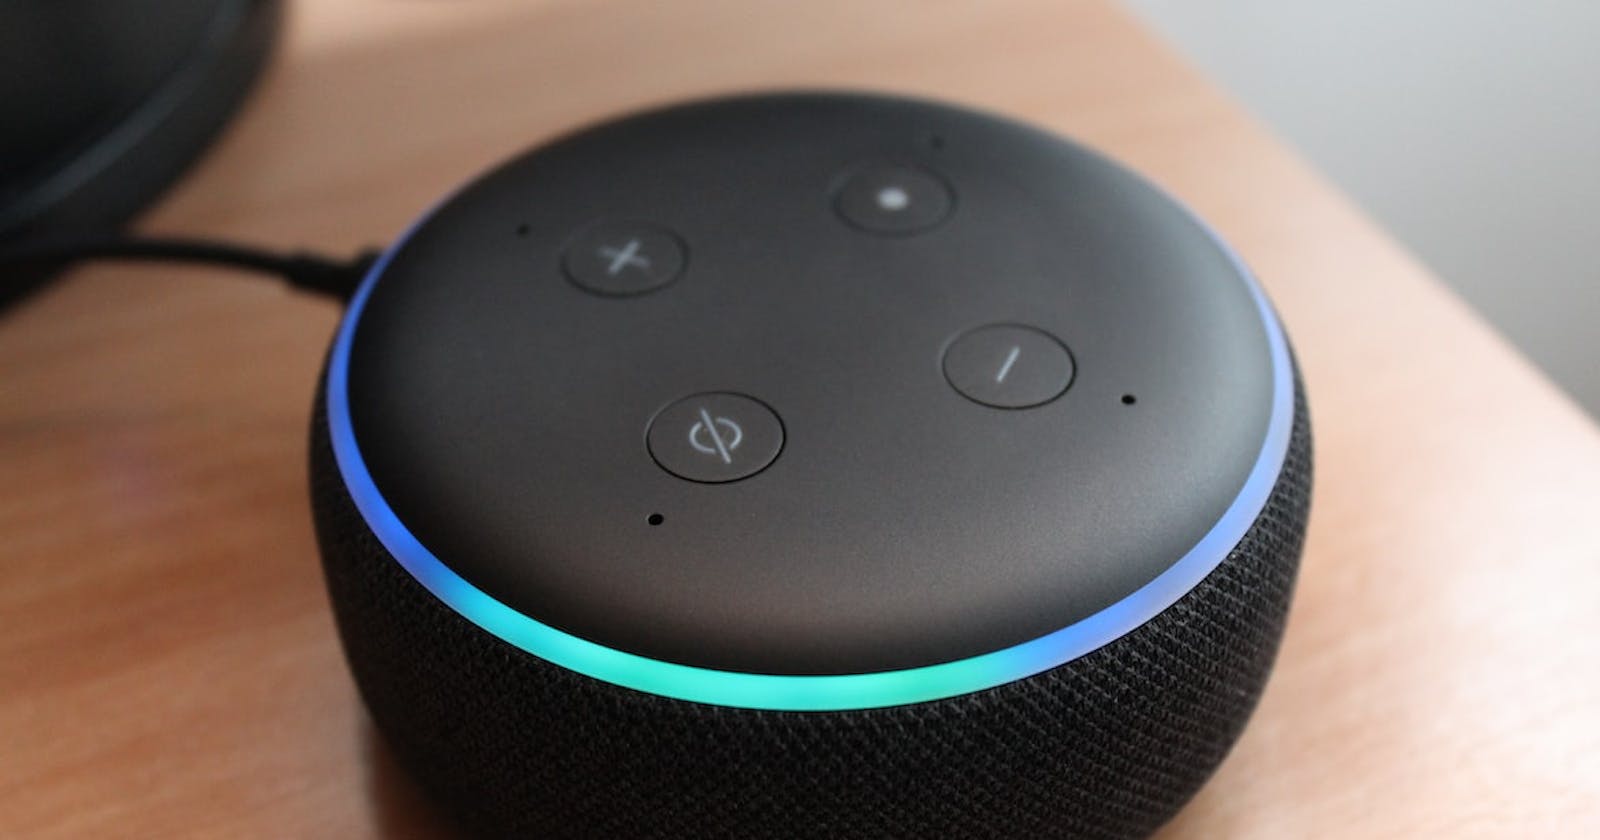 Build a Voice Controlled SmartHome using openHAB and Alexa